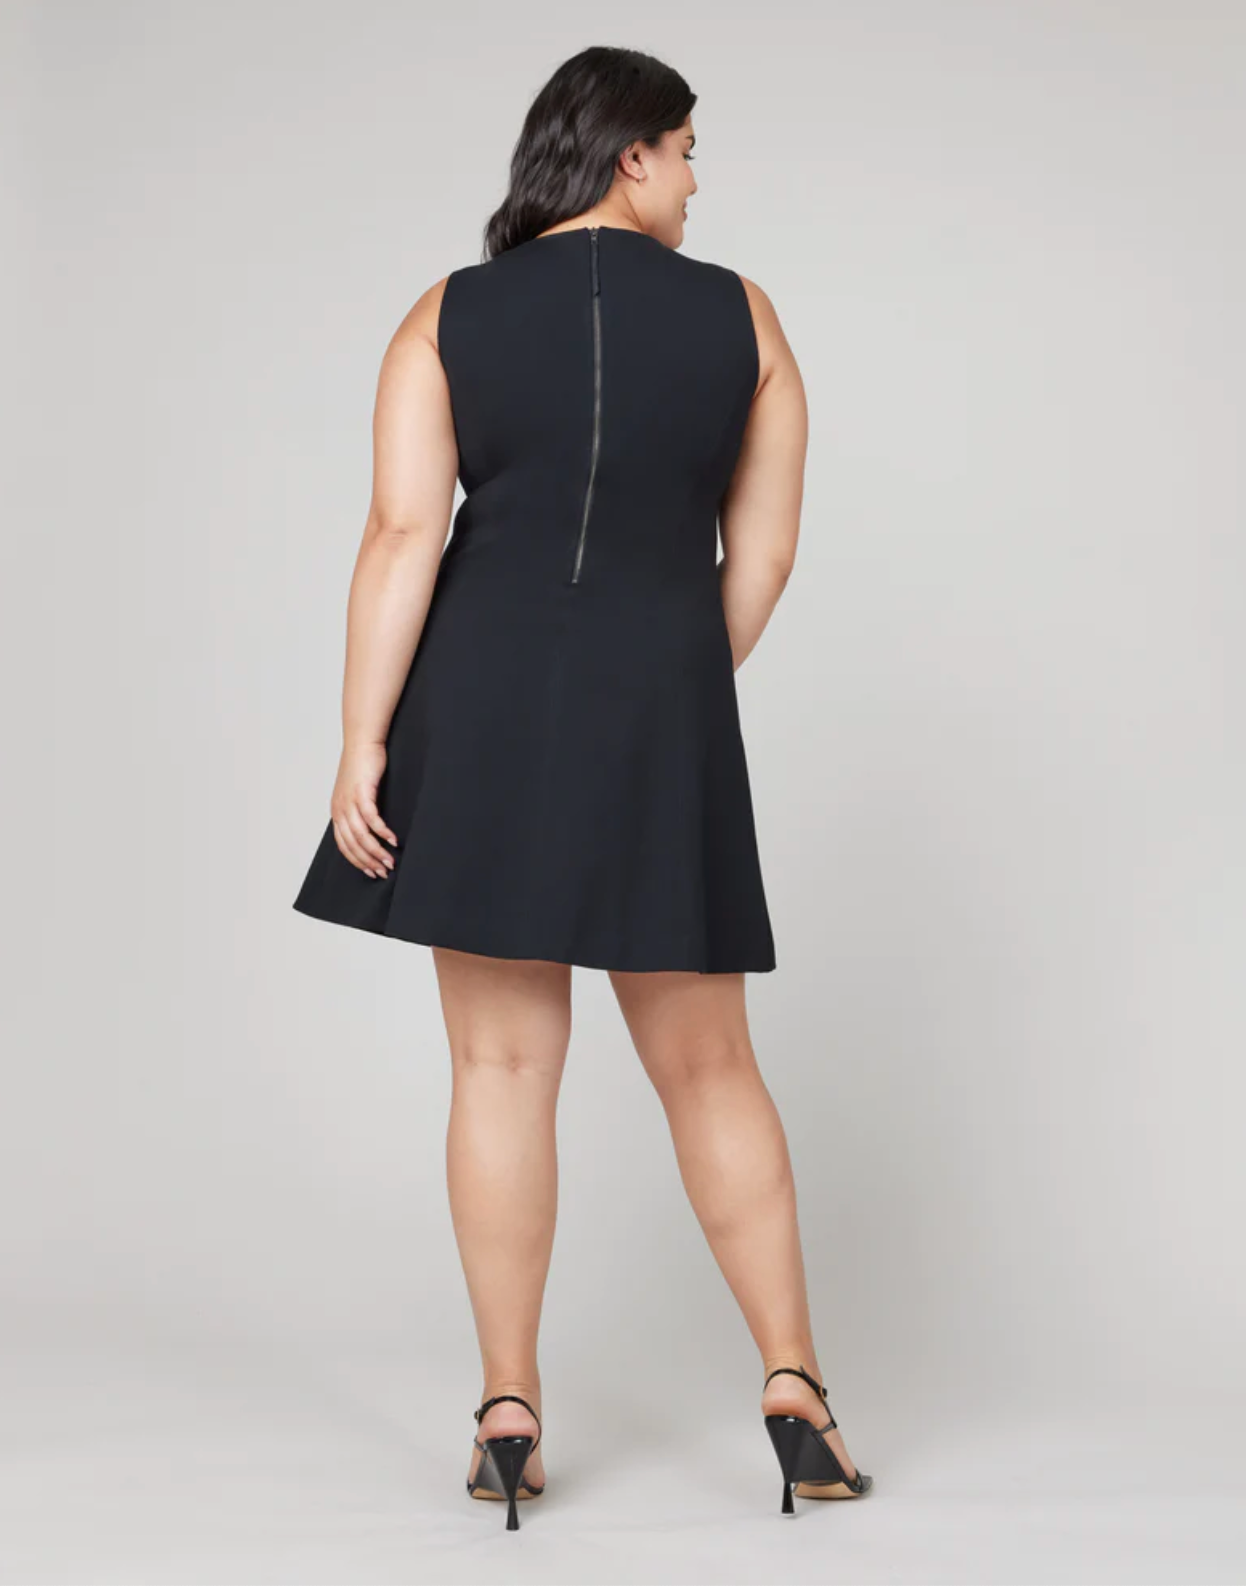 The Perfect Fit and Flare Dress